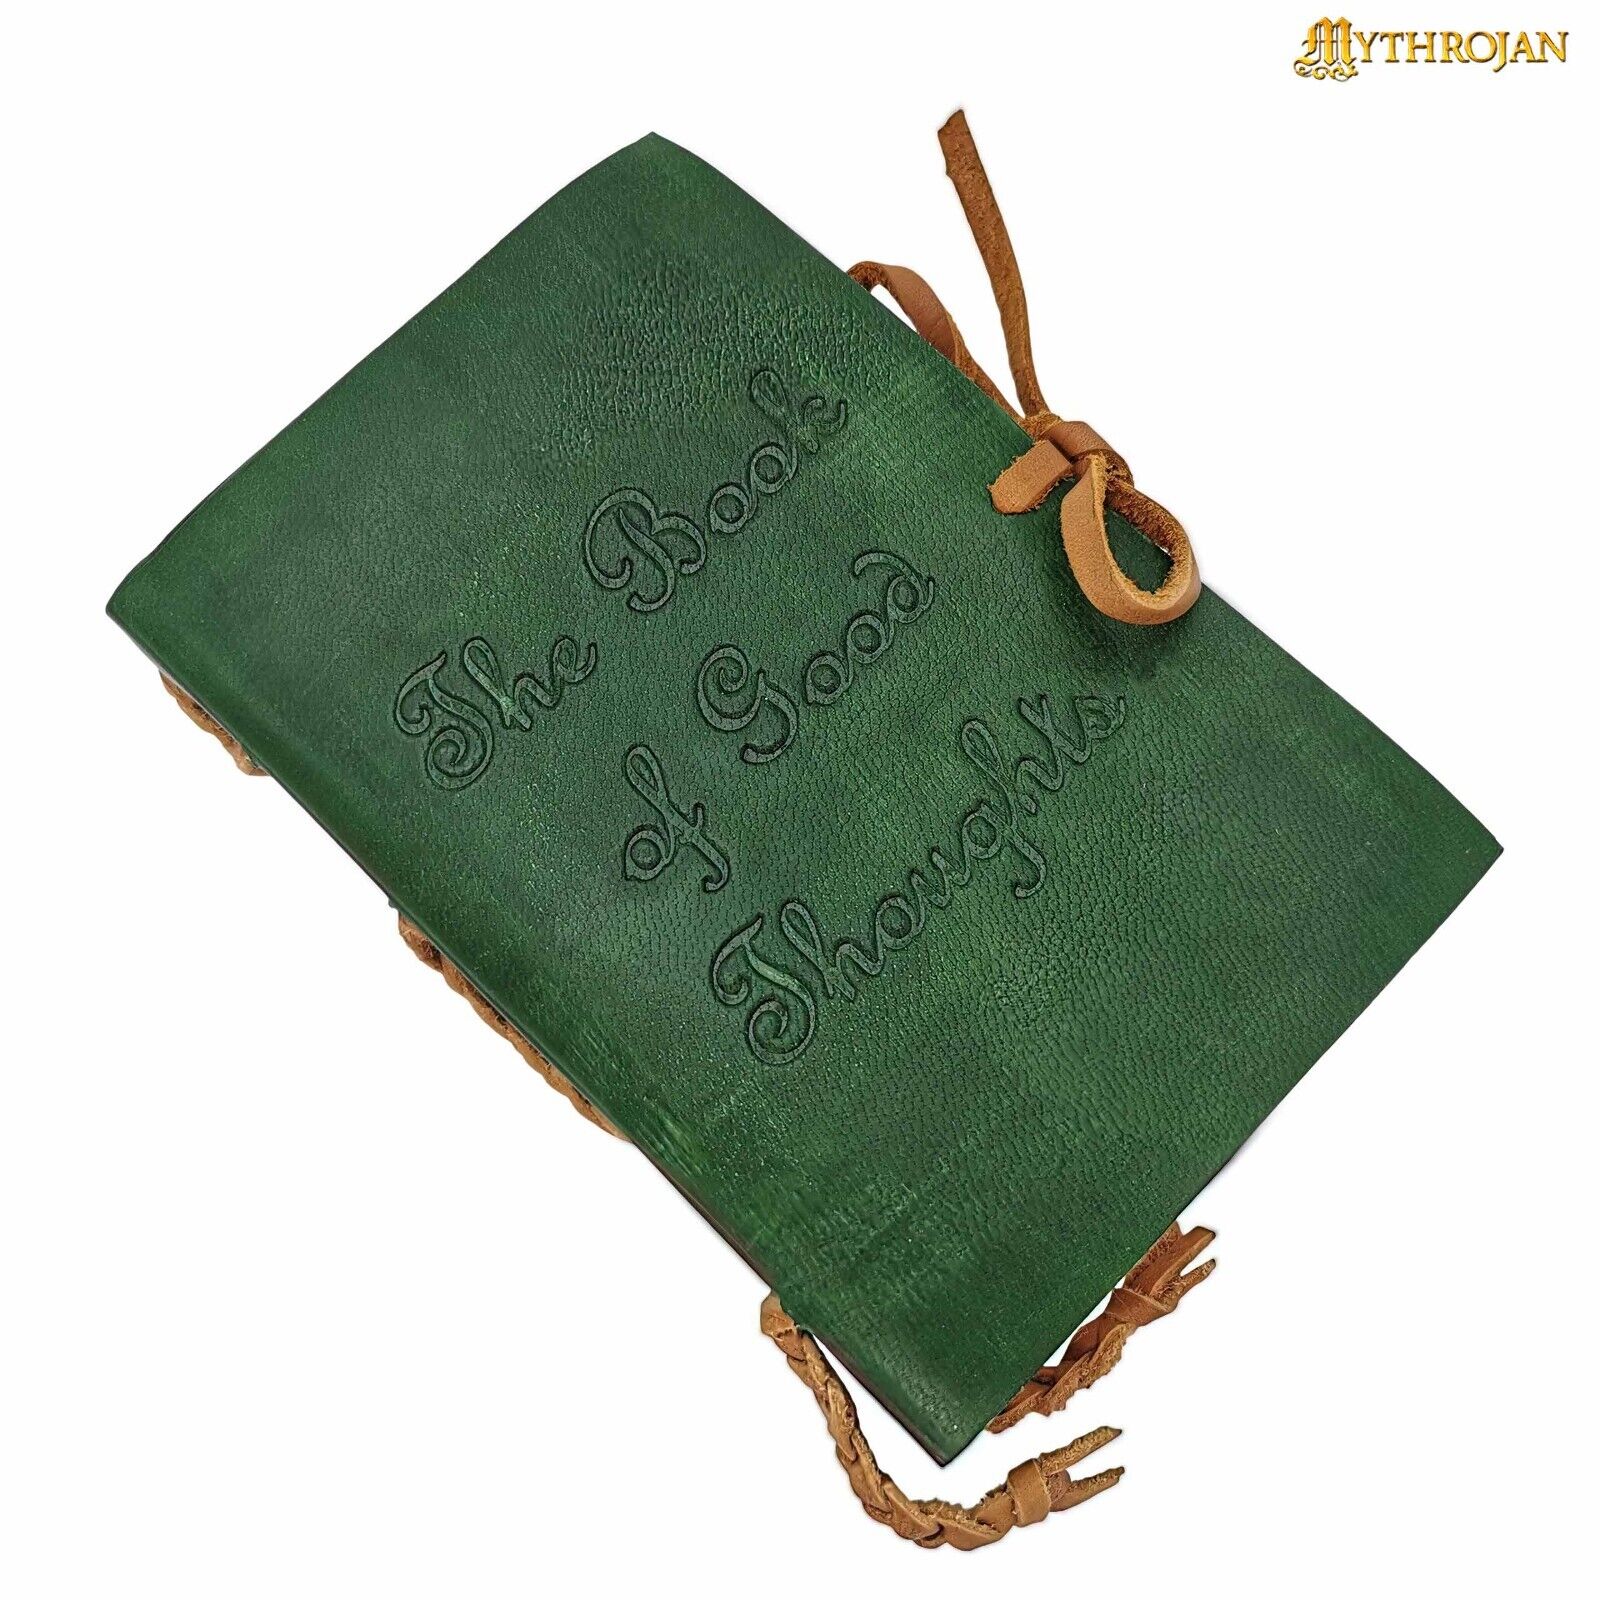 Leather Bound Journal Blank Notebook The Book of Good Thoughts Medieval Diary